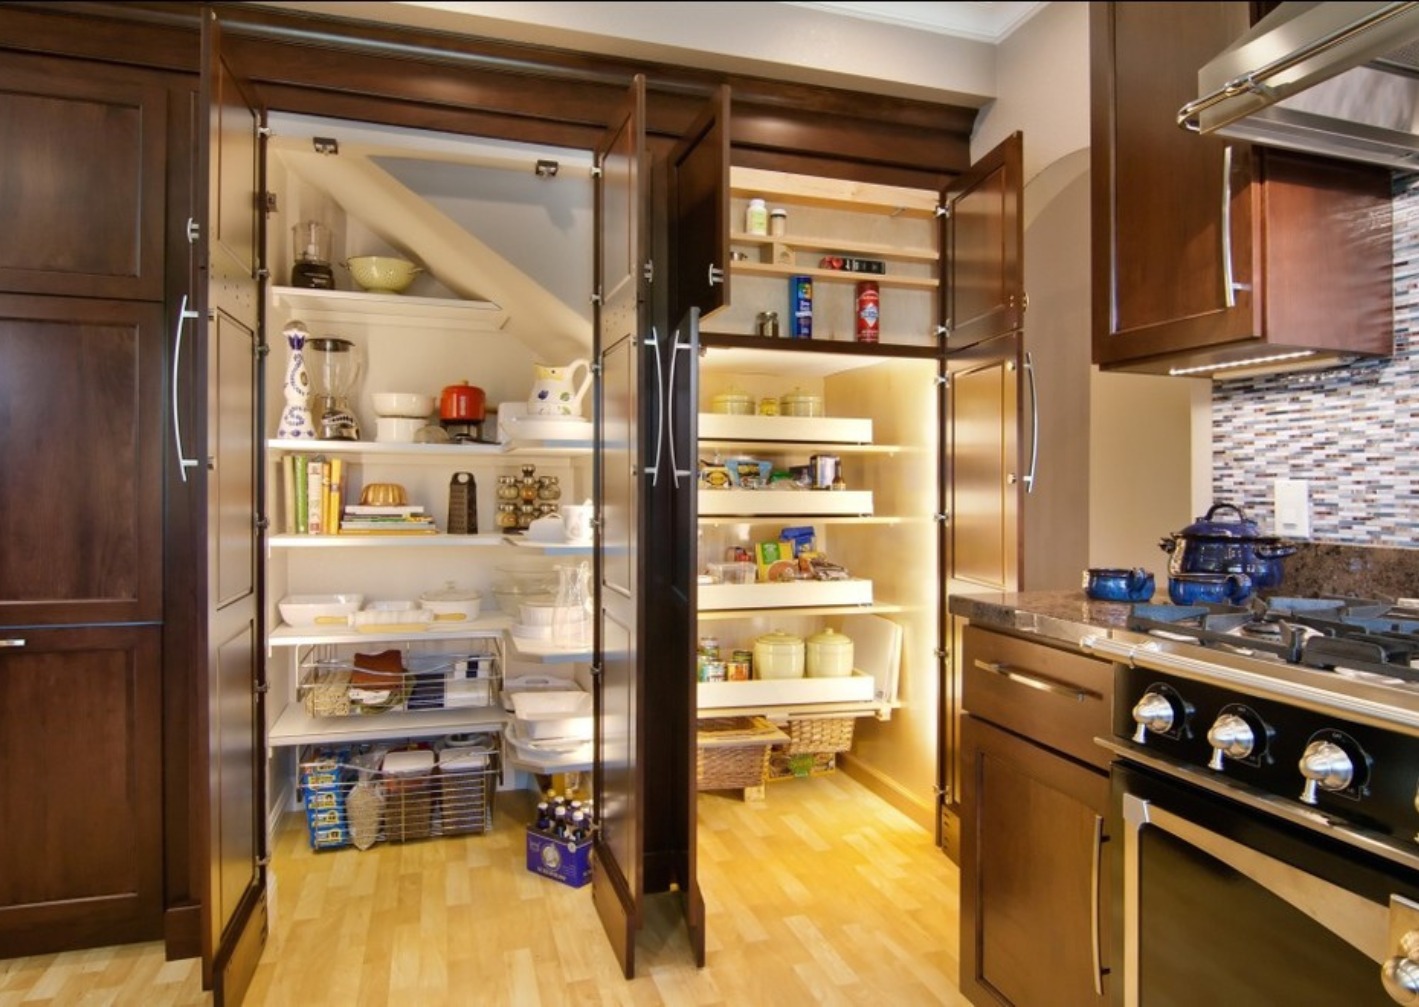 Pantry Area